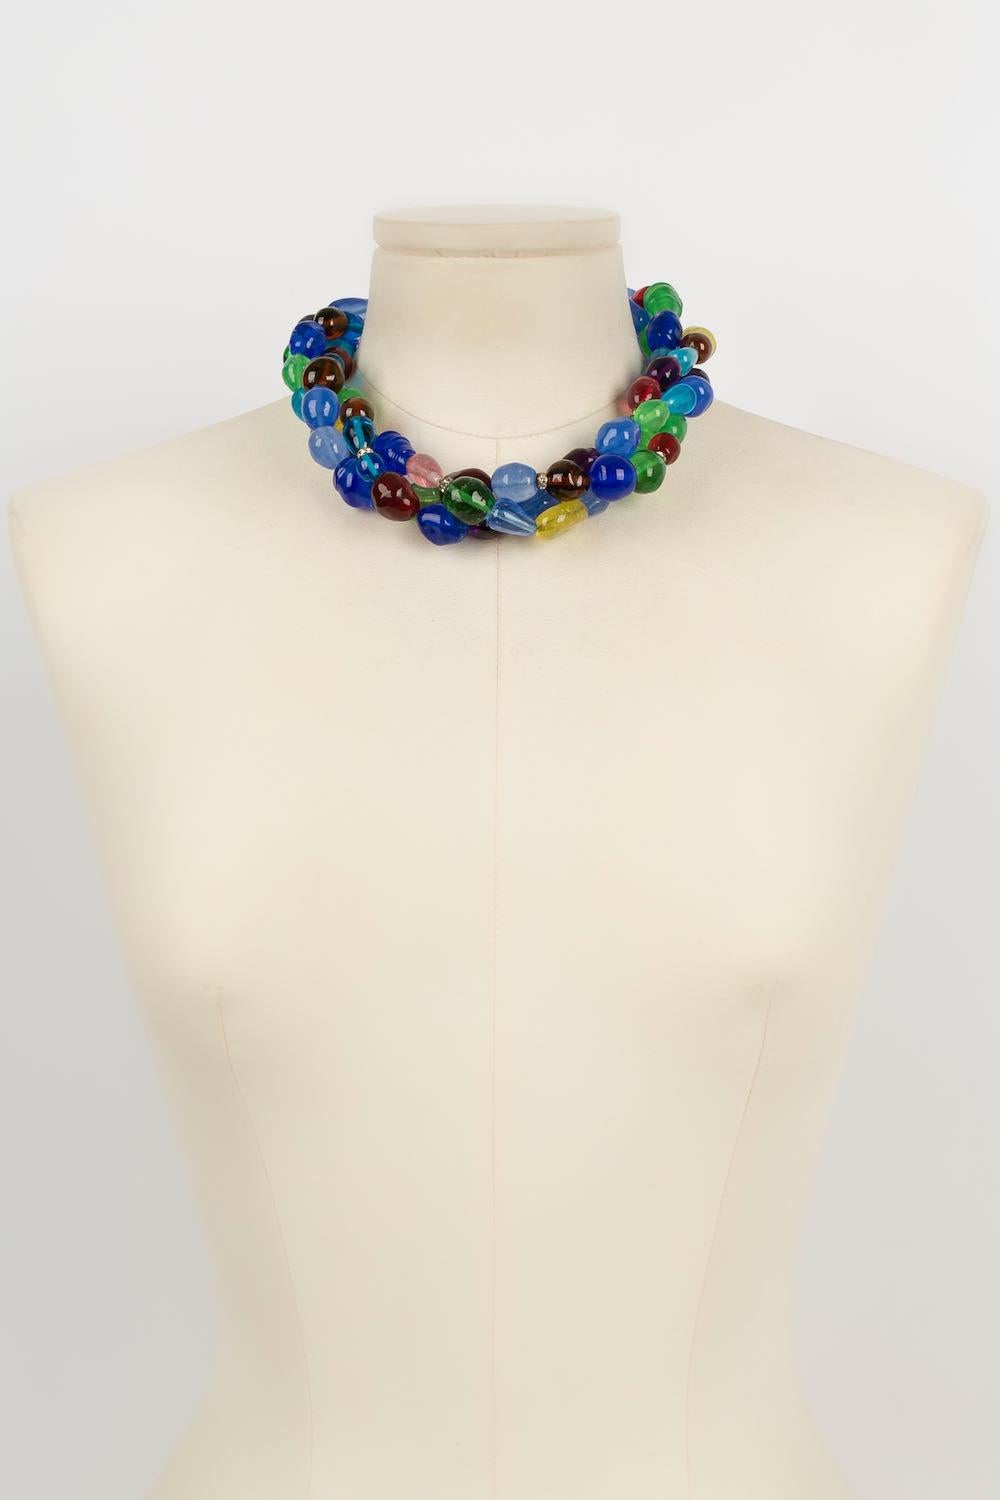 Chanel Necklace in Multicolored Glass Paste and Rhinestones In Excellent Condition For Sale In SAINT-OUEN-SUR-SEINE, FR